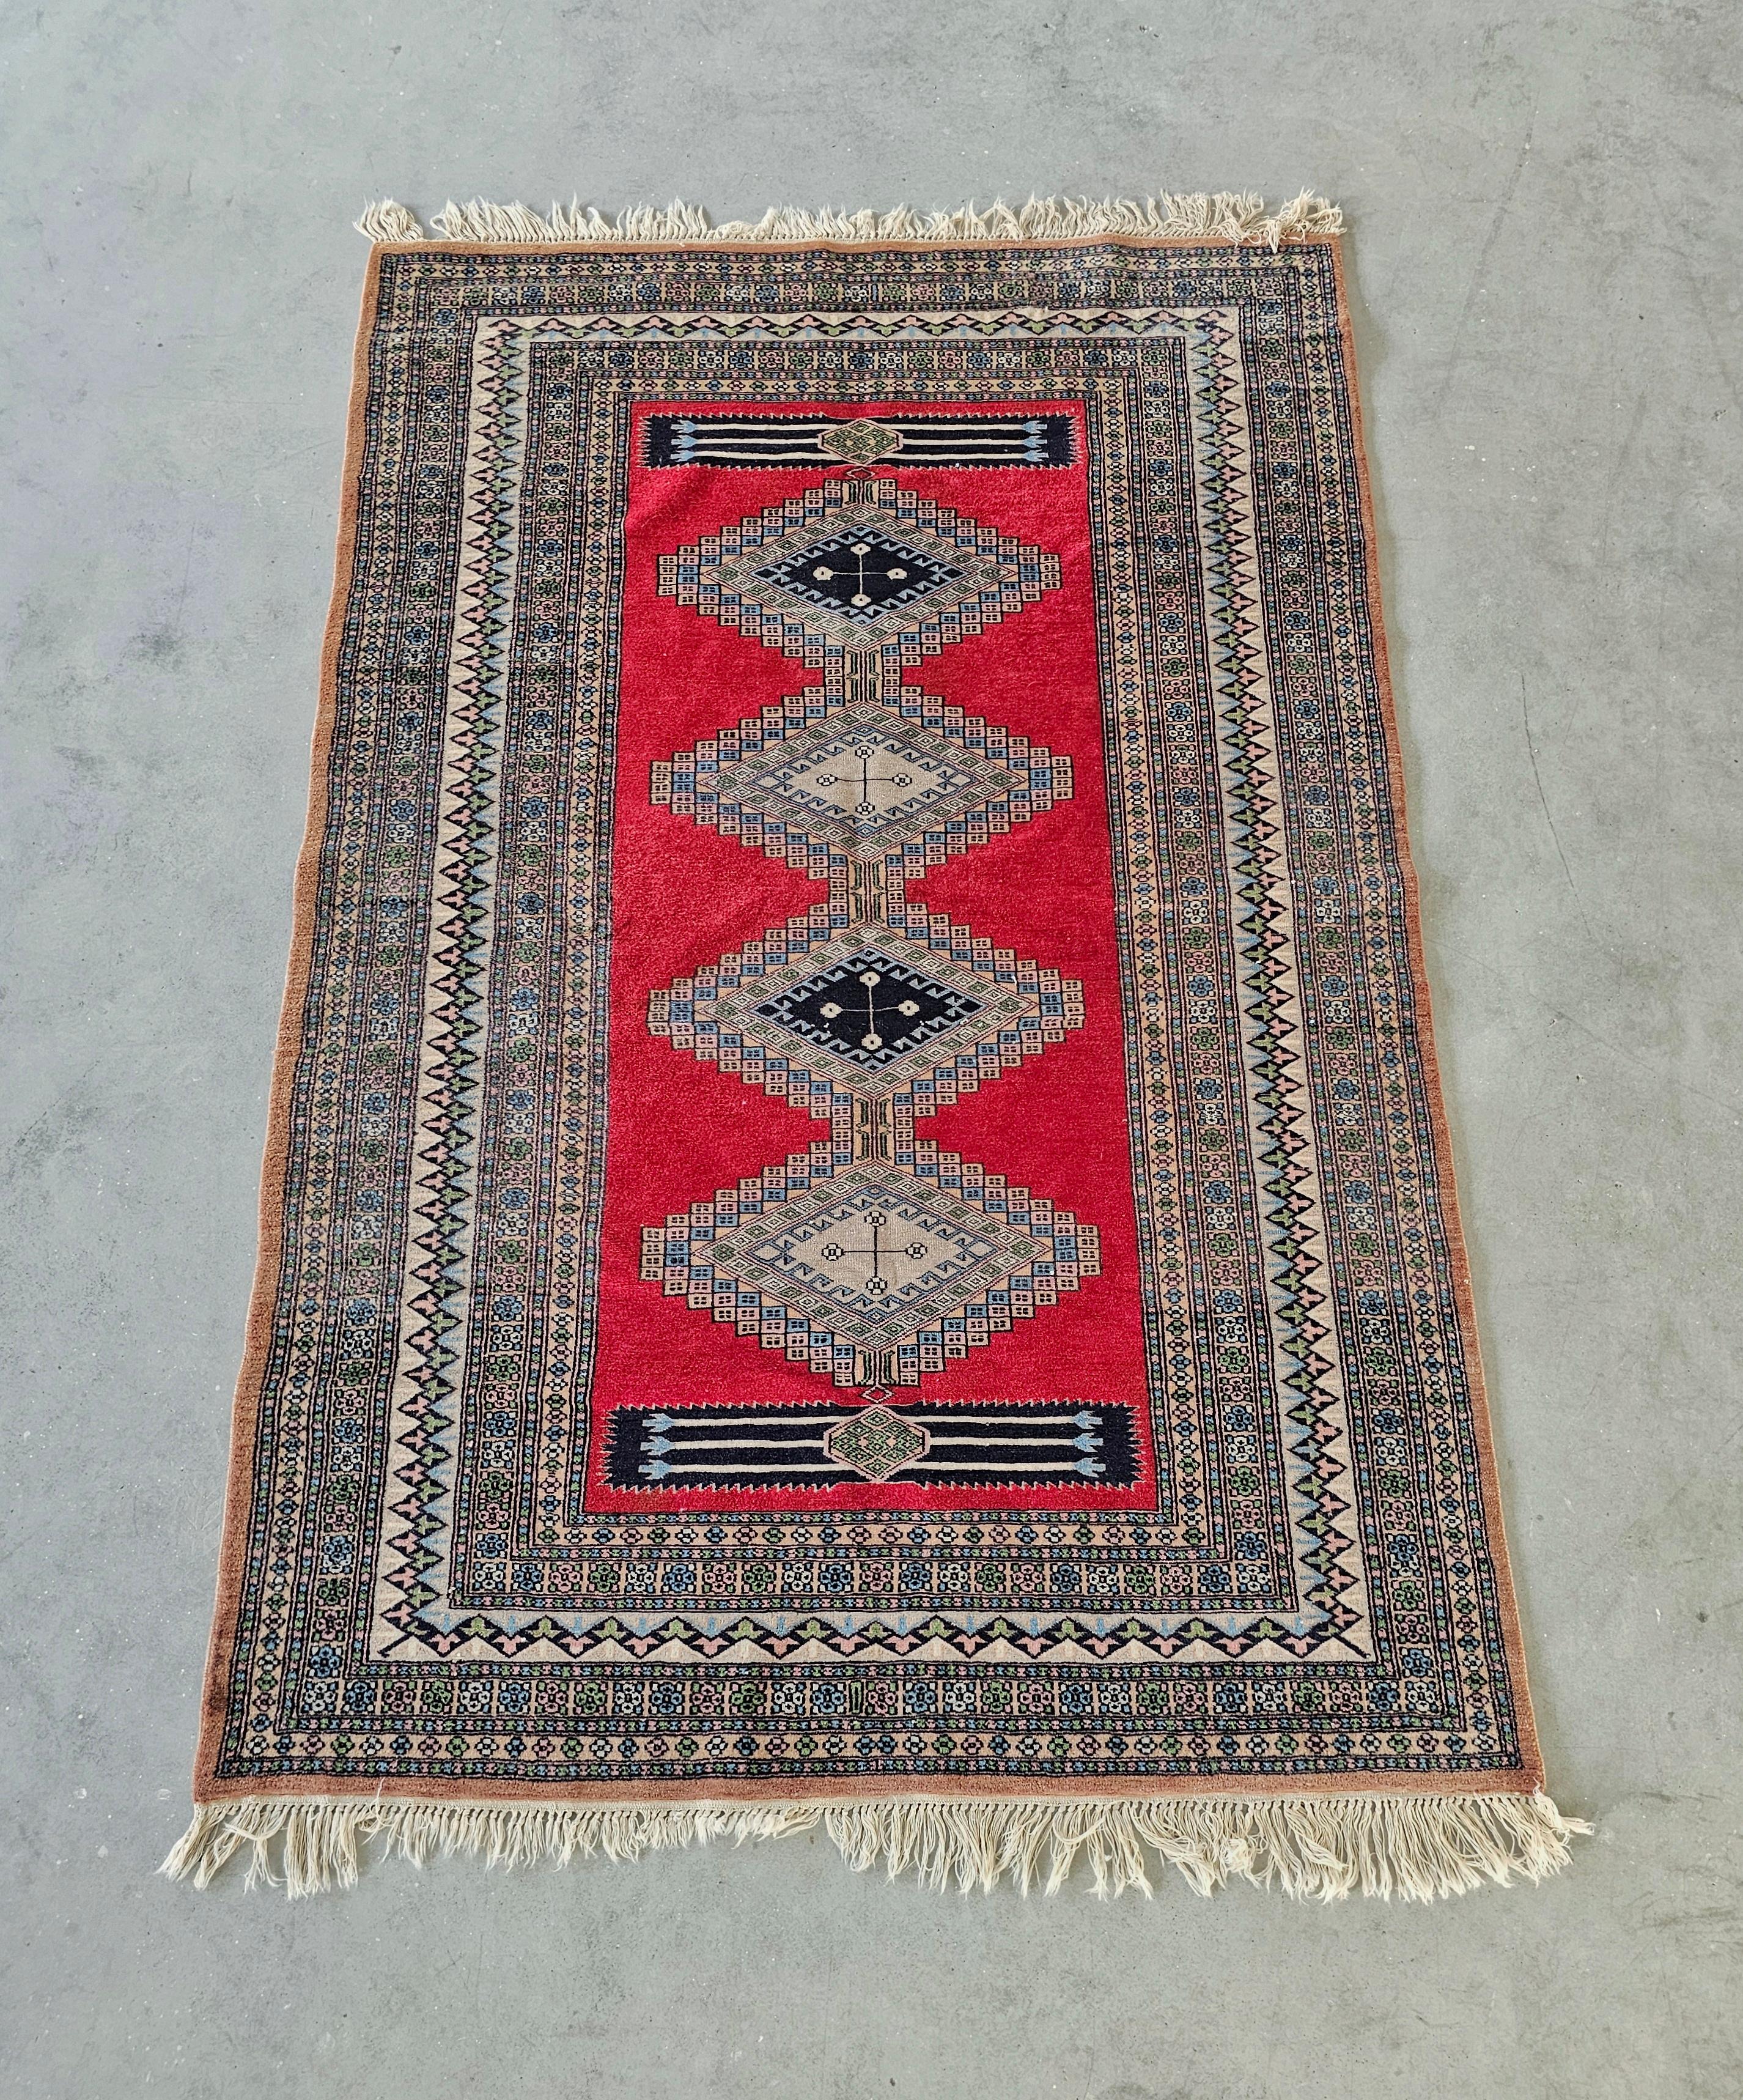 In this listing you will find a gorgeous medium size Persian area rug hand-knotted in 100% fine wool. The rug belongs to Ghom rugs, featuring high density knots. Made in Pakistan in 1930s.

Rug is in very good antique condition with light signs of